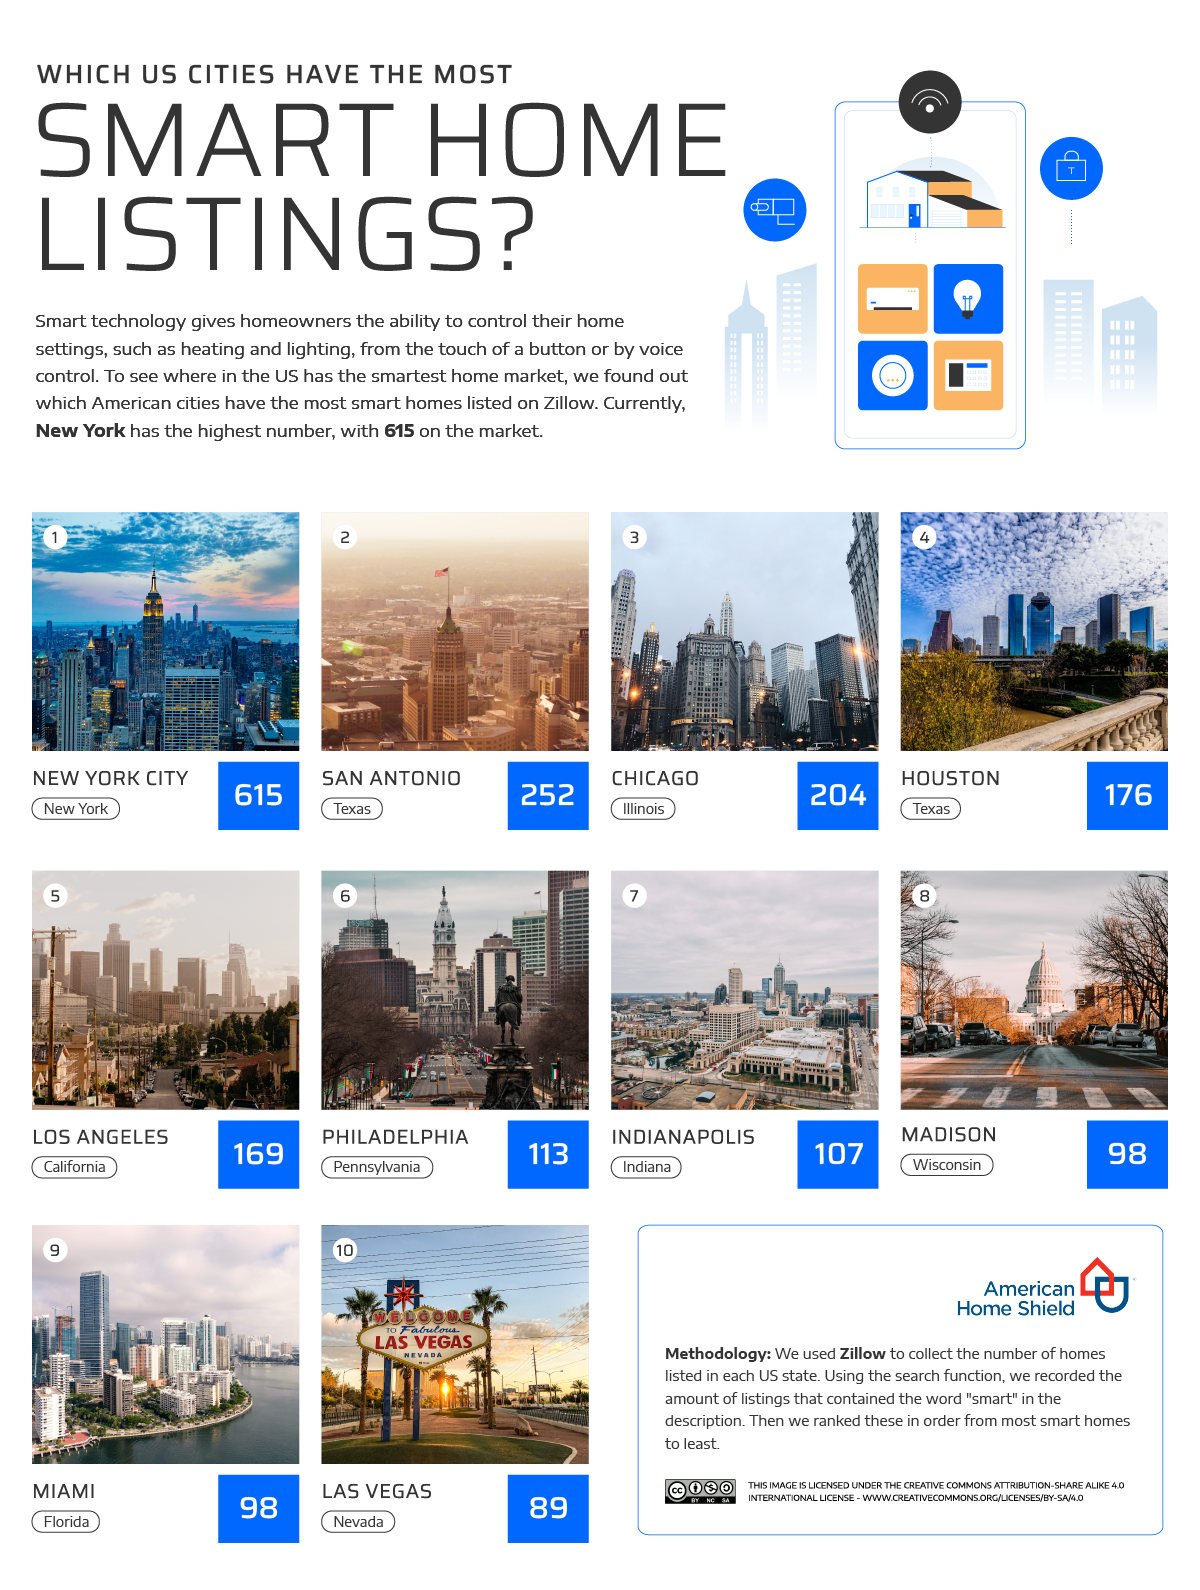 Top 10 US States With the Most Smart Home Listings Overall